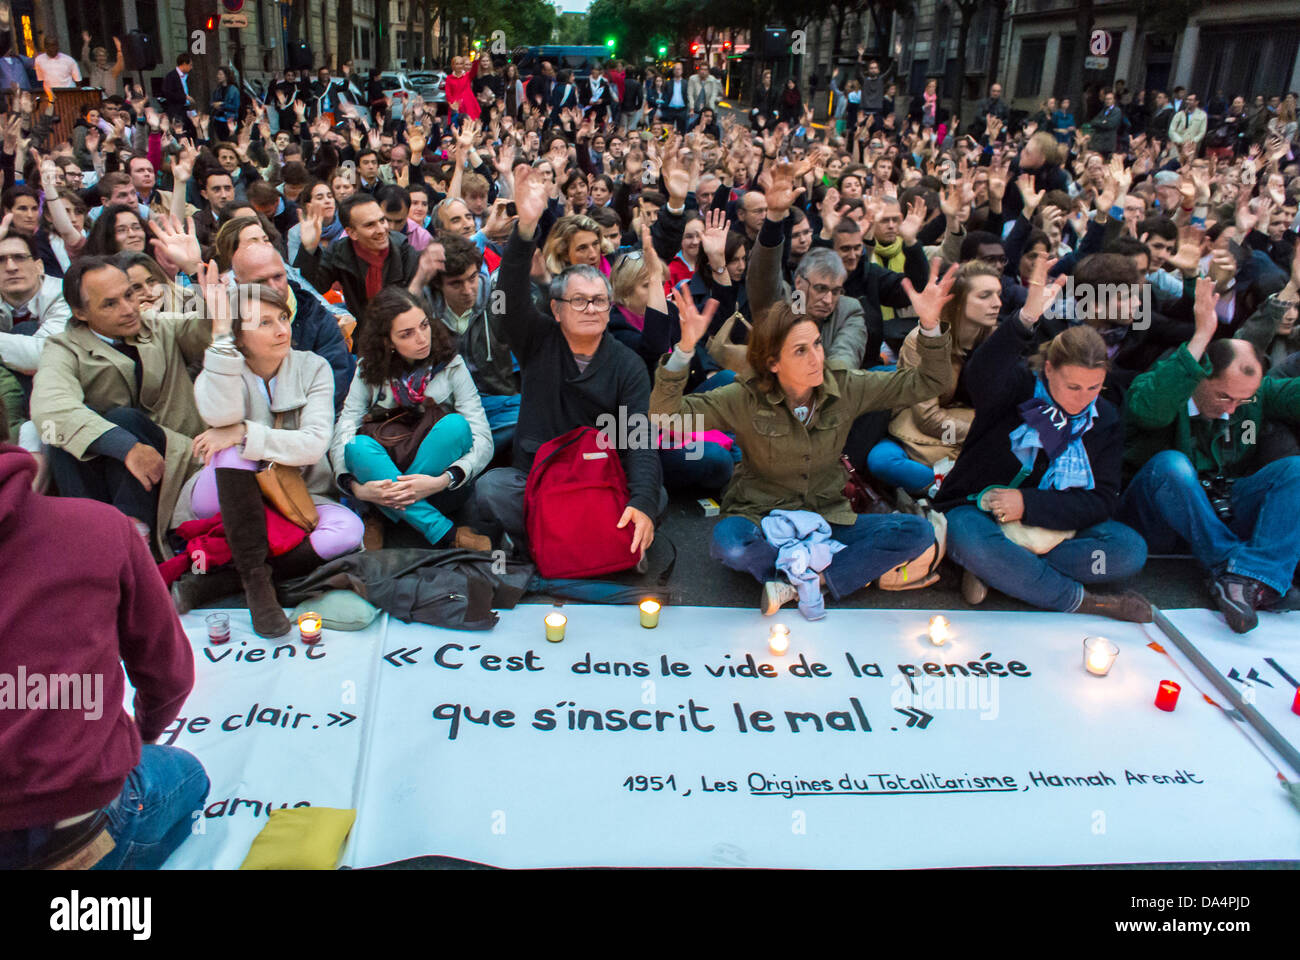 Pa-ris, France. Crowd of People Sitting on Street, Far Right, Conservative Group 'Les Vielleurs' Demonstration Anti-Gay Marriage, Occupy, religious meeting, different cultures religion, sit in Stock Photo